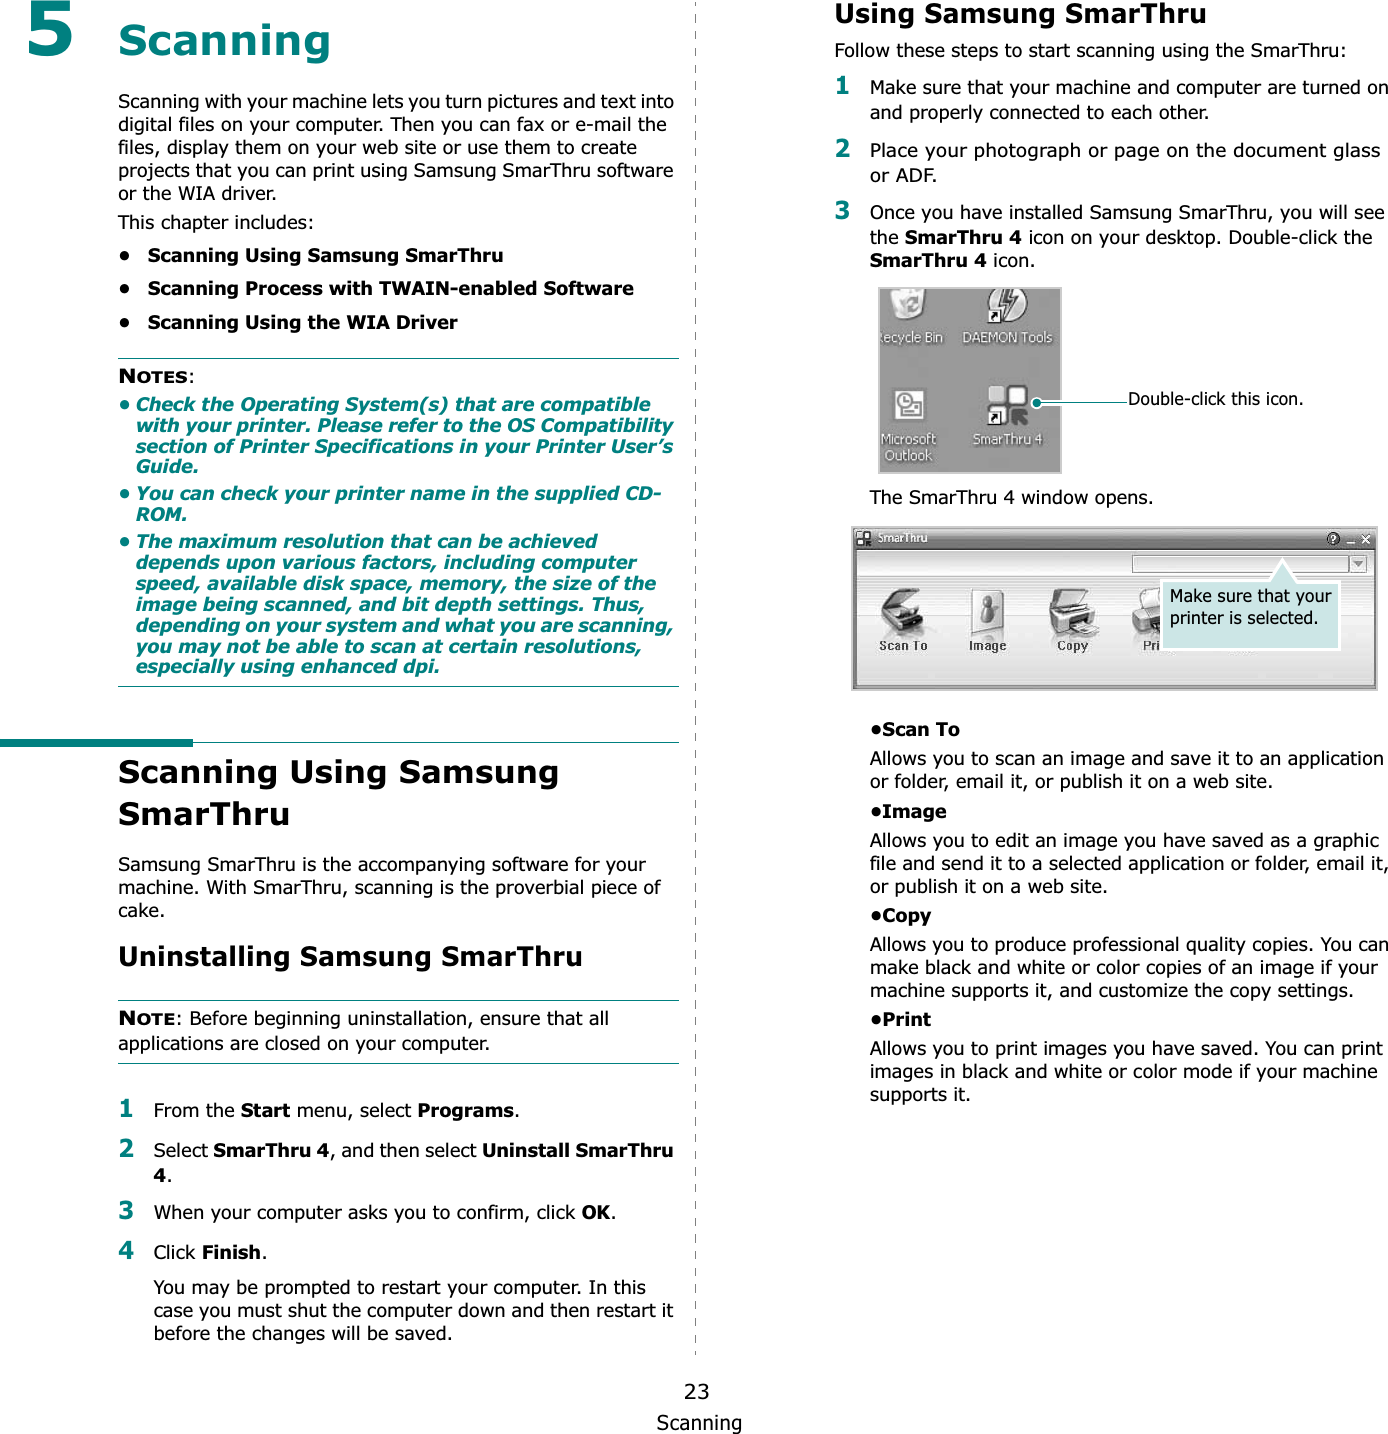 Scanning235ScanningScanning with your machine lets you turn pictures and text into digital files on your computer. Then you can fax or e-mail the files, display them on your web site or use them to create projects that you can print using Samsung SmarThru software or the WIA driver.This chapter includes:• Scanning Using Samsung SmarThru• Scanning Process with TWAIN-enabled Software• Scanning Using the WIA DriverNOTES:• Check the Operating System(s) that are compatible with your printer. Please refer to the OS Compatibility section of Printer Specifications in your Printer User’s Guide.• You can check your printer name in the supplied CD-ROM.• The maximum resolution that can be achieved depends upon various factors, including computer speed, available disk space, memory, the size of the image being scanned, and bit depth settings. Thus, depending on your system and what you are scanning, you may not be able to scan at certain resolutions, especially using enhanced dpi.Scanning Using Samsung SmarThruSamsung SmarThru is the accompanying software for your machine. With SmarThru, scanning is the proverbial piece of cake.Uninstalling Samsung SmarThruNOTE: Before beginning uninstallation, ensure that all applications are closed on your computer. 1From the Start menu, select Programs.2Select SmarThru 4, and then select Uninstall SmarThru 4.3When your computer asks you to confirm, click OK.4Click Finish.You may be prompted to restart your computer. In this case you must shut the computer down and then restart it before the changes will be saved.Using Samsung SmarThruFollow these steps to start scanning using the SmarThru:1Make sure that your machine and computer are turned on and properly connected to each other. 2Place your photograph or page on the document glass or ADF.3Once you have installed Samsung SmarThru, you will see the SmarThru 4 icon on your desktop. Double-click the SmarThru 4 icon.The SmarThru 4 window opens.•Scan ToAllows you to scan an image and save it to an application or folder, email it, or publish it on a web site. •ImageAllows you to edit an image you have saved as a graphic file and send it to a selected application or folder, email it, or publish it on a web site. •CopyAllows you to produce professional quality copies. You can make black and white or color copies of an image if your machine supports it, and customize the copy settings. •PrintAllows you to print images you have saved. You can print images in black and white or color mode if your machine supports it.Double-click this icon.Make sure that your printer is selected.